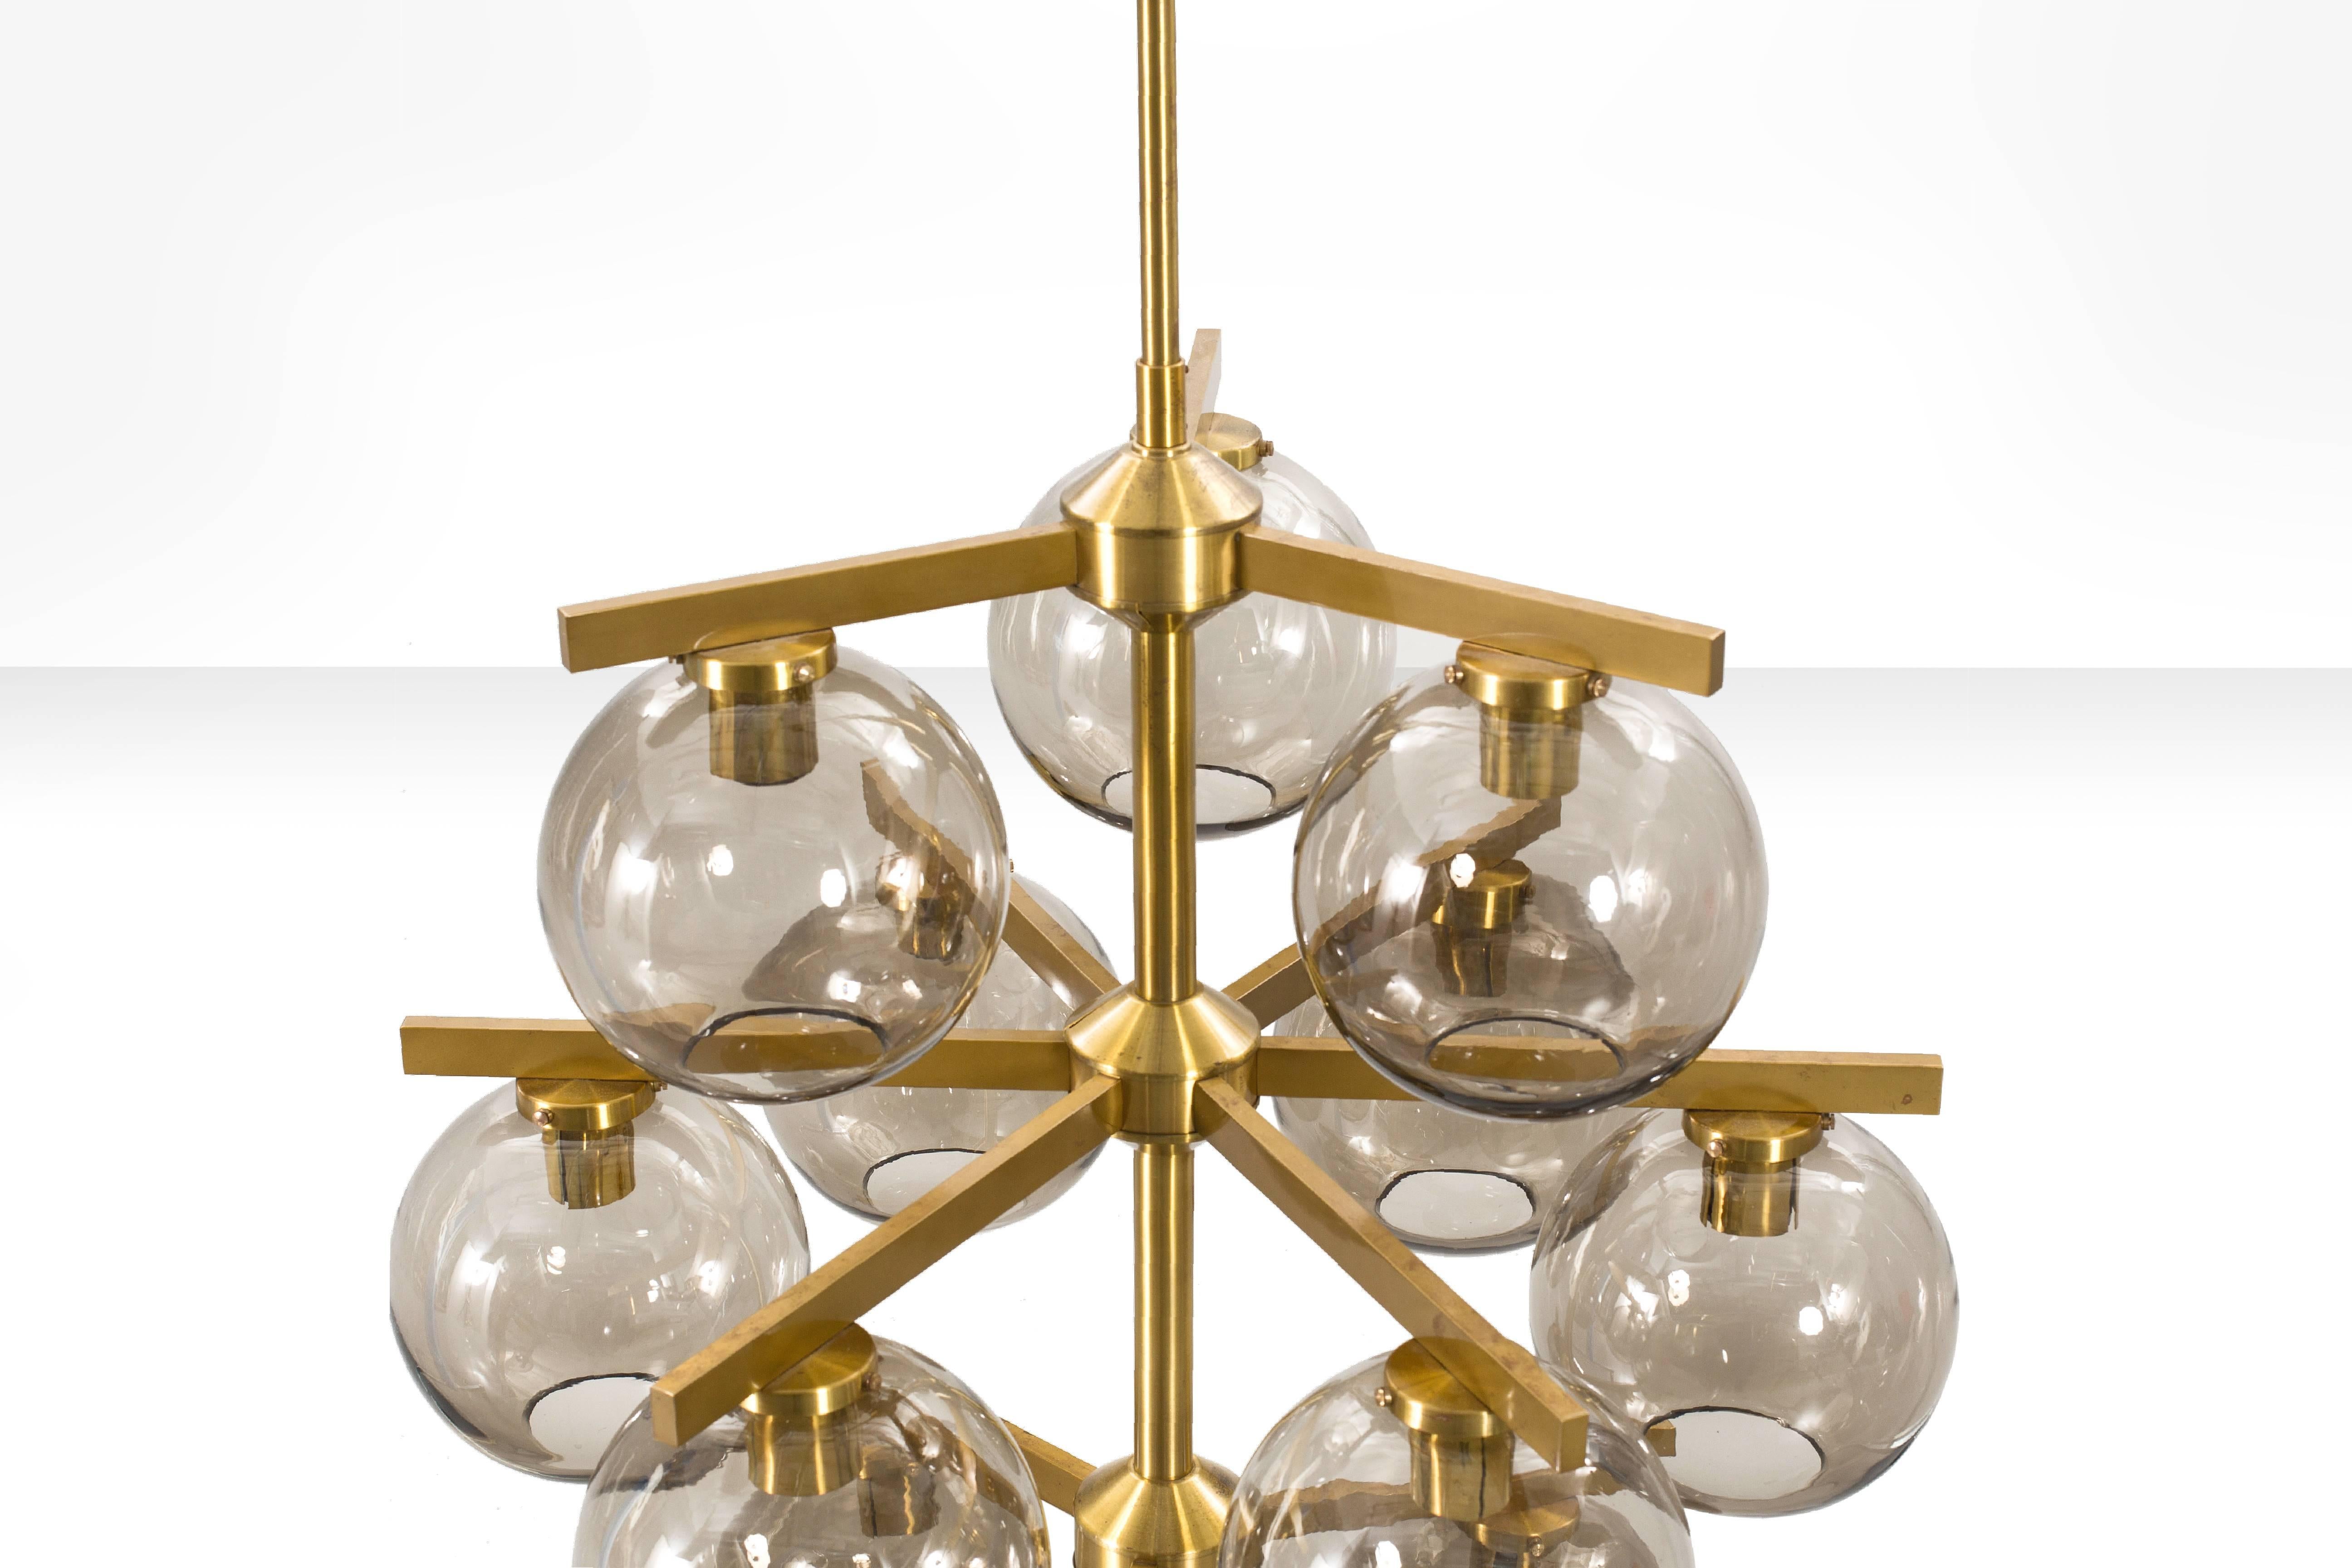 Swedish Holger Johansson Chandelier with 12 Smoked Glass Shades, Sweden, 1960s